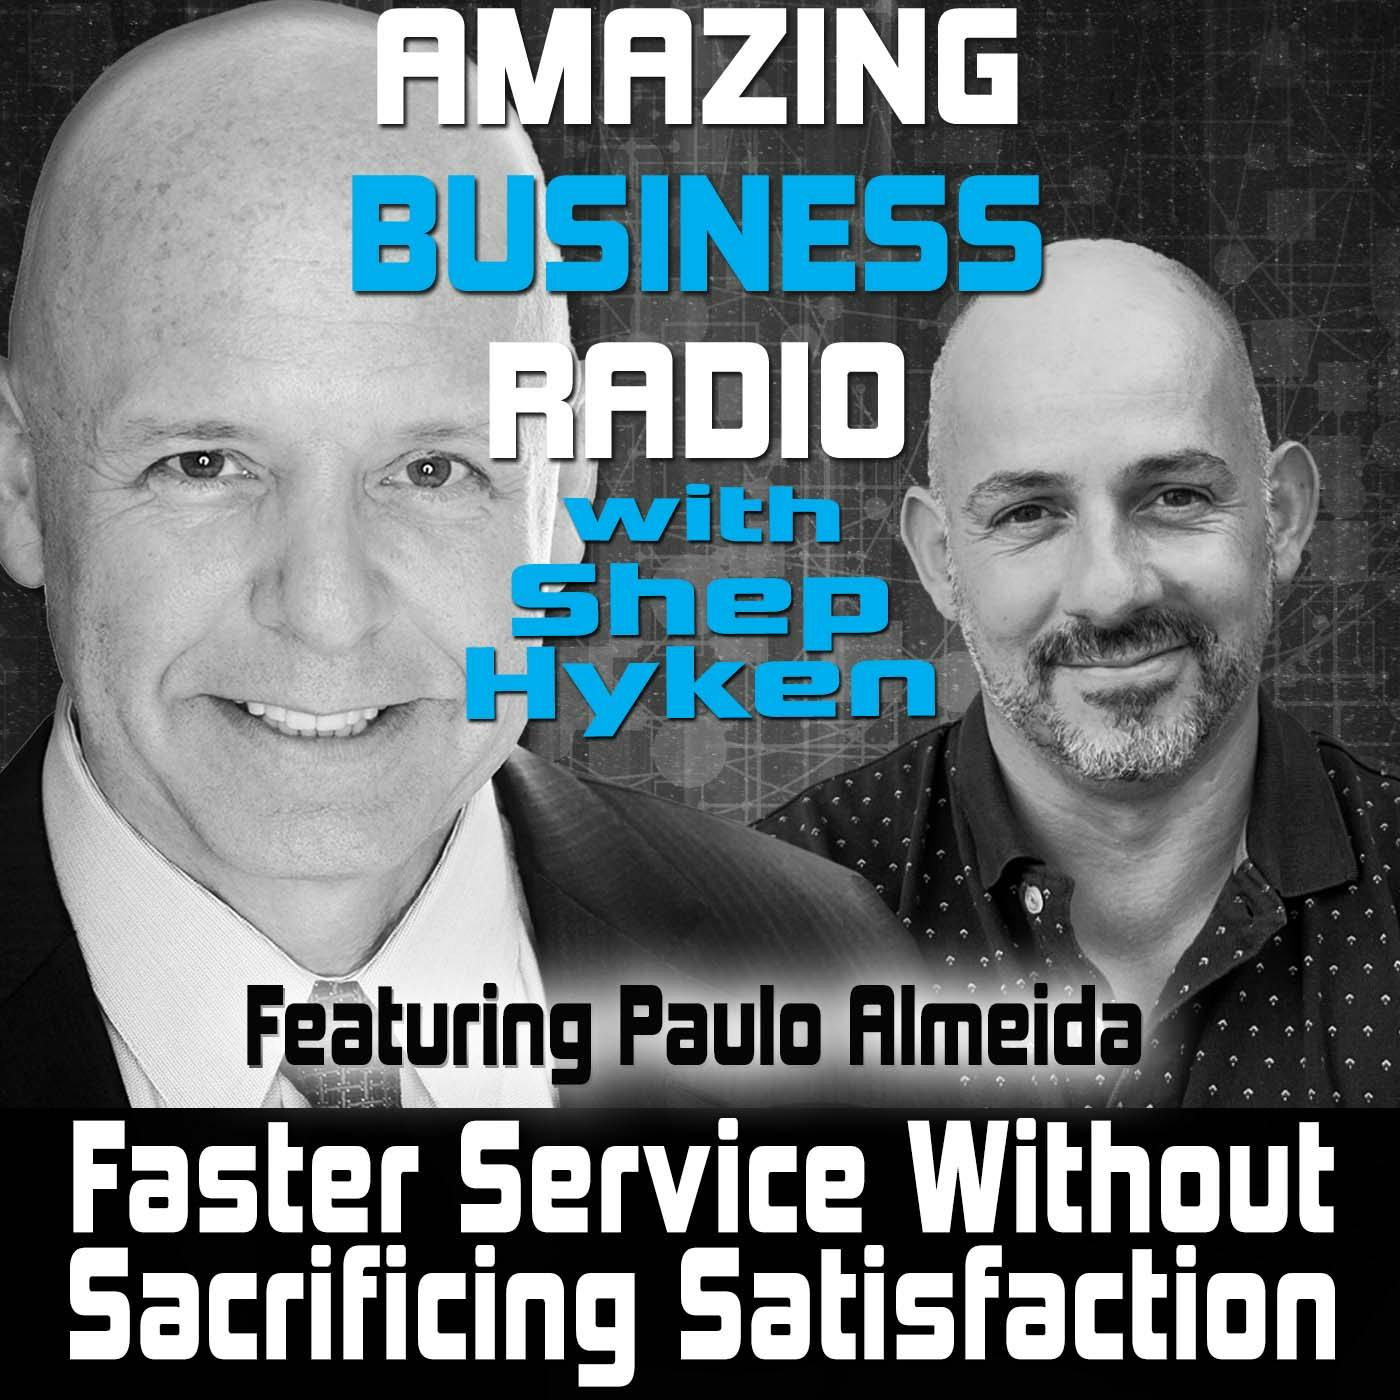 Faster Service Without Sacrificing Satisfaction Featuring Paulo Almeida